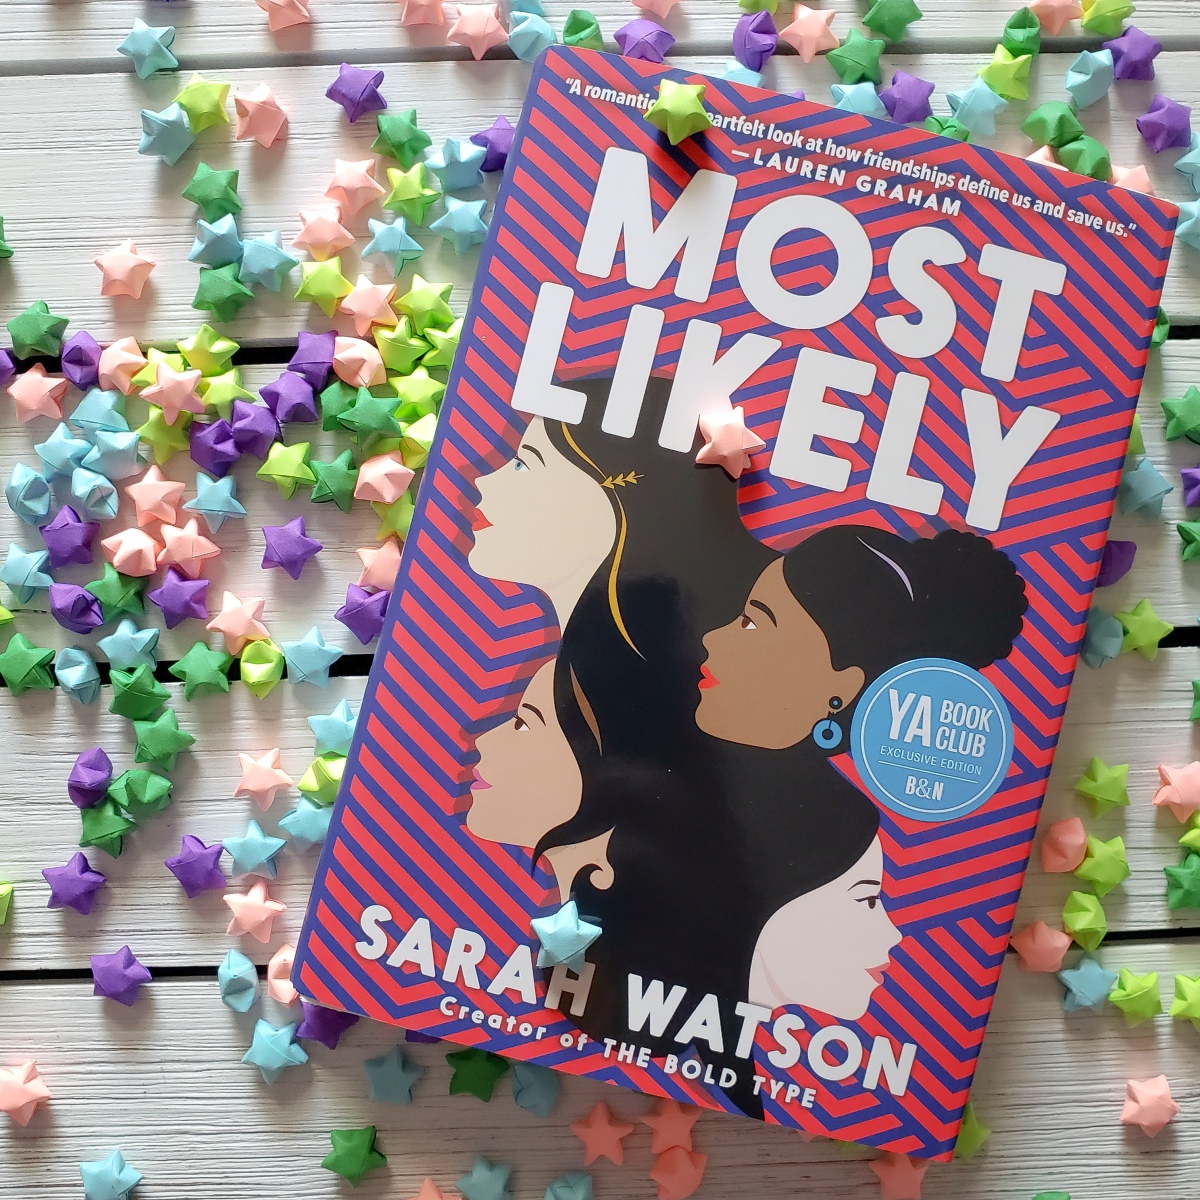 Most Likely by Sarah Watson